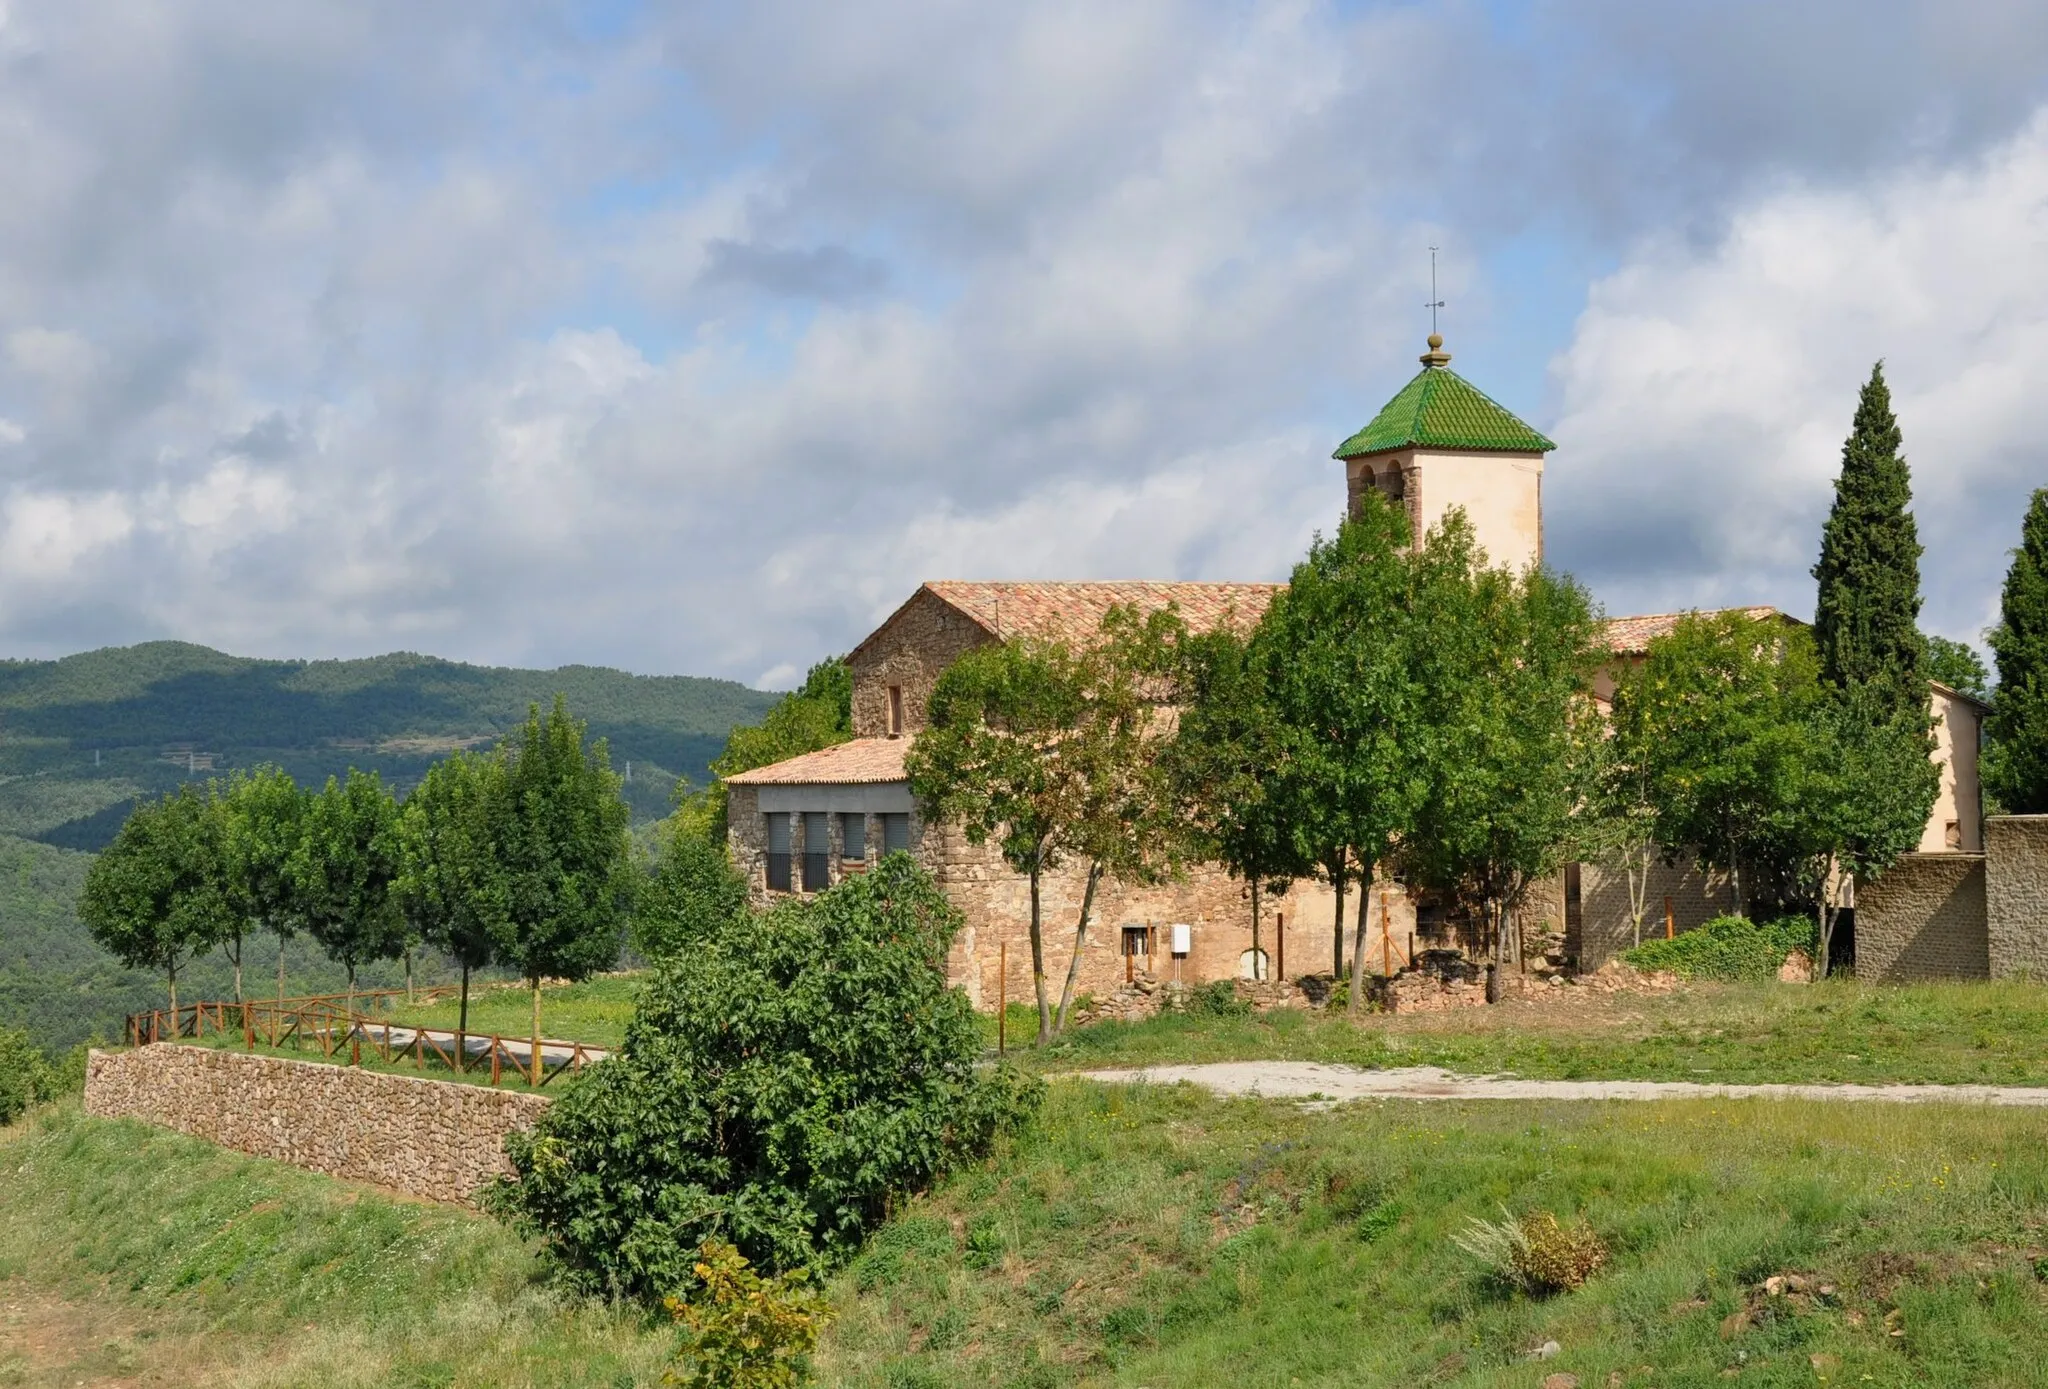 Photo showing: Church of St. Quiricus and St. Julietta of Muntanyola (Comarca of Osona, Catalonia, Spain). This is a 17th century church, built and decorated with the simple yet rich forms of the Spanish Baroque. Eight centuries earlier a first church was built in this location.